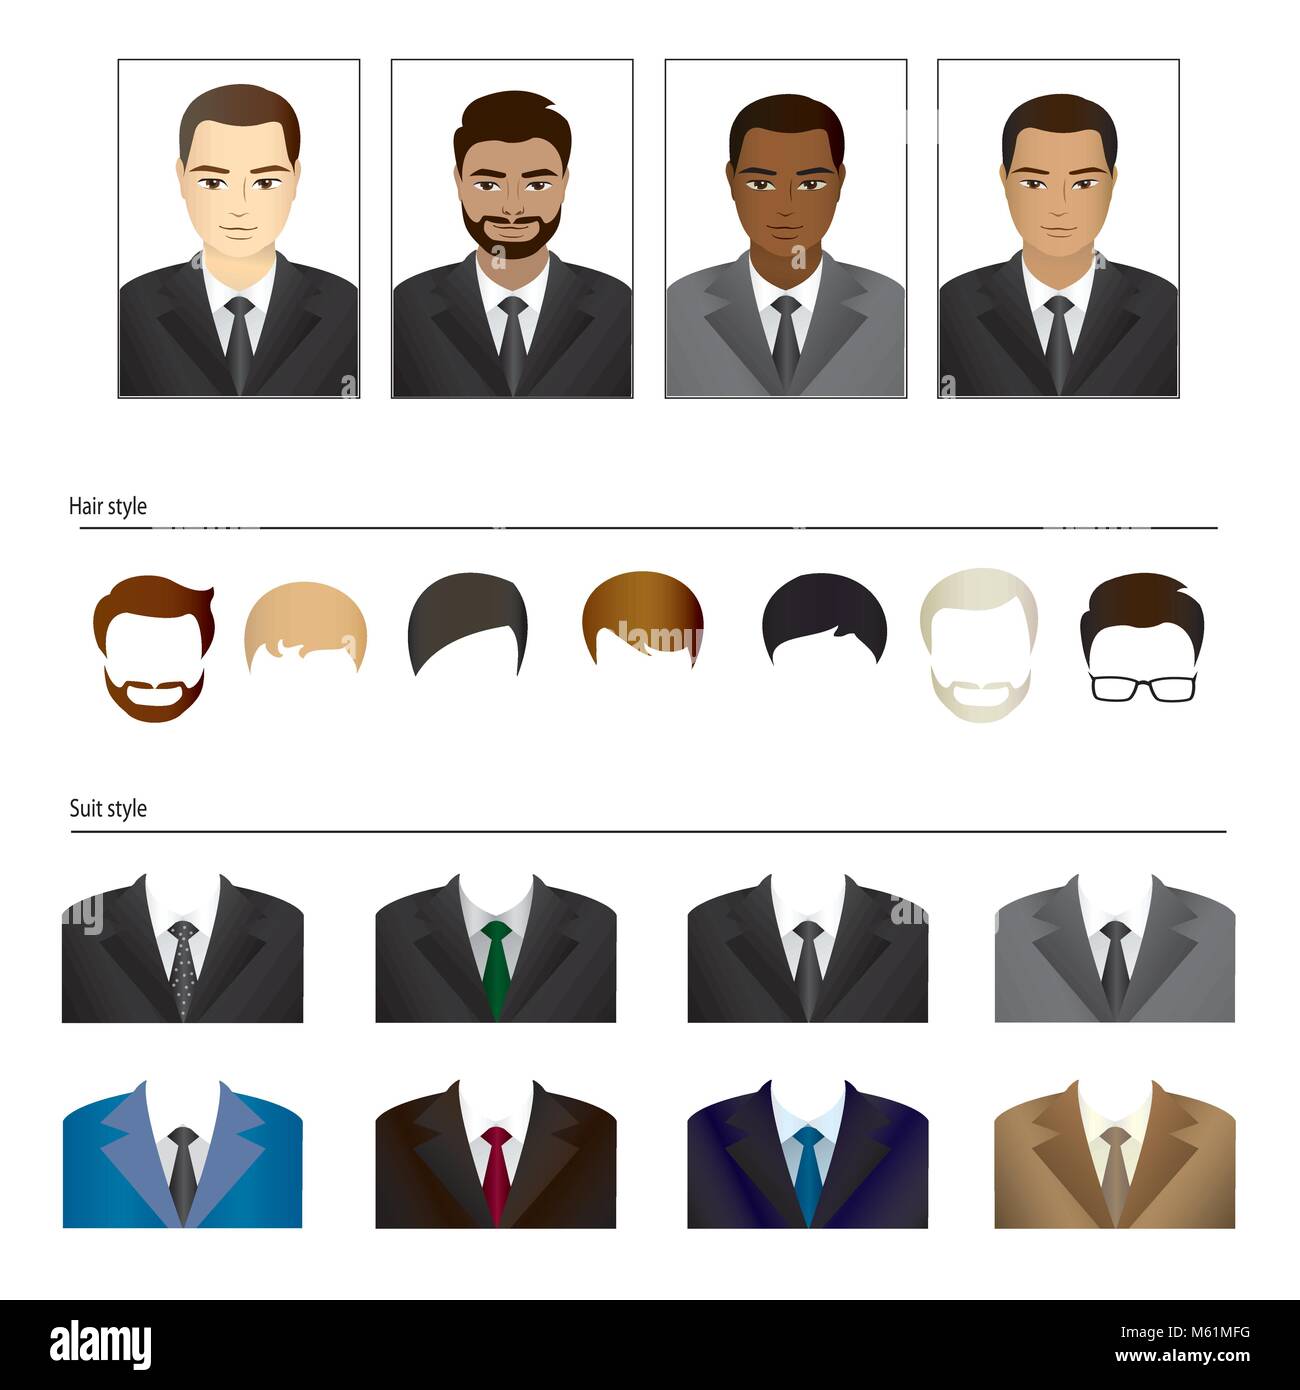 Set templates business suits and hairstyles, Stock Vector